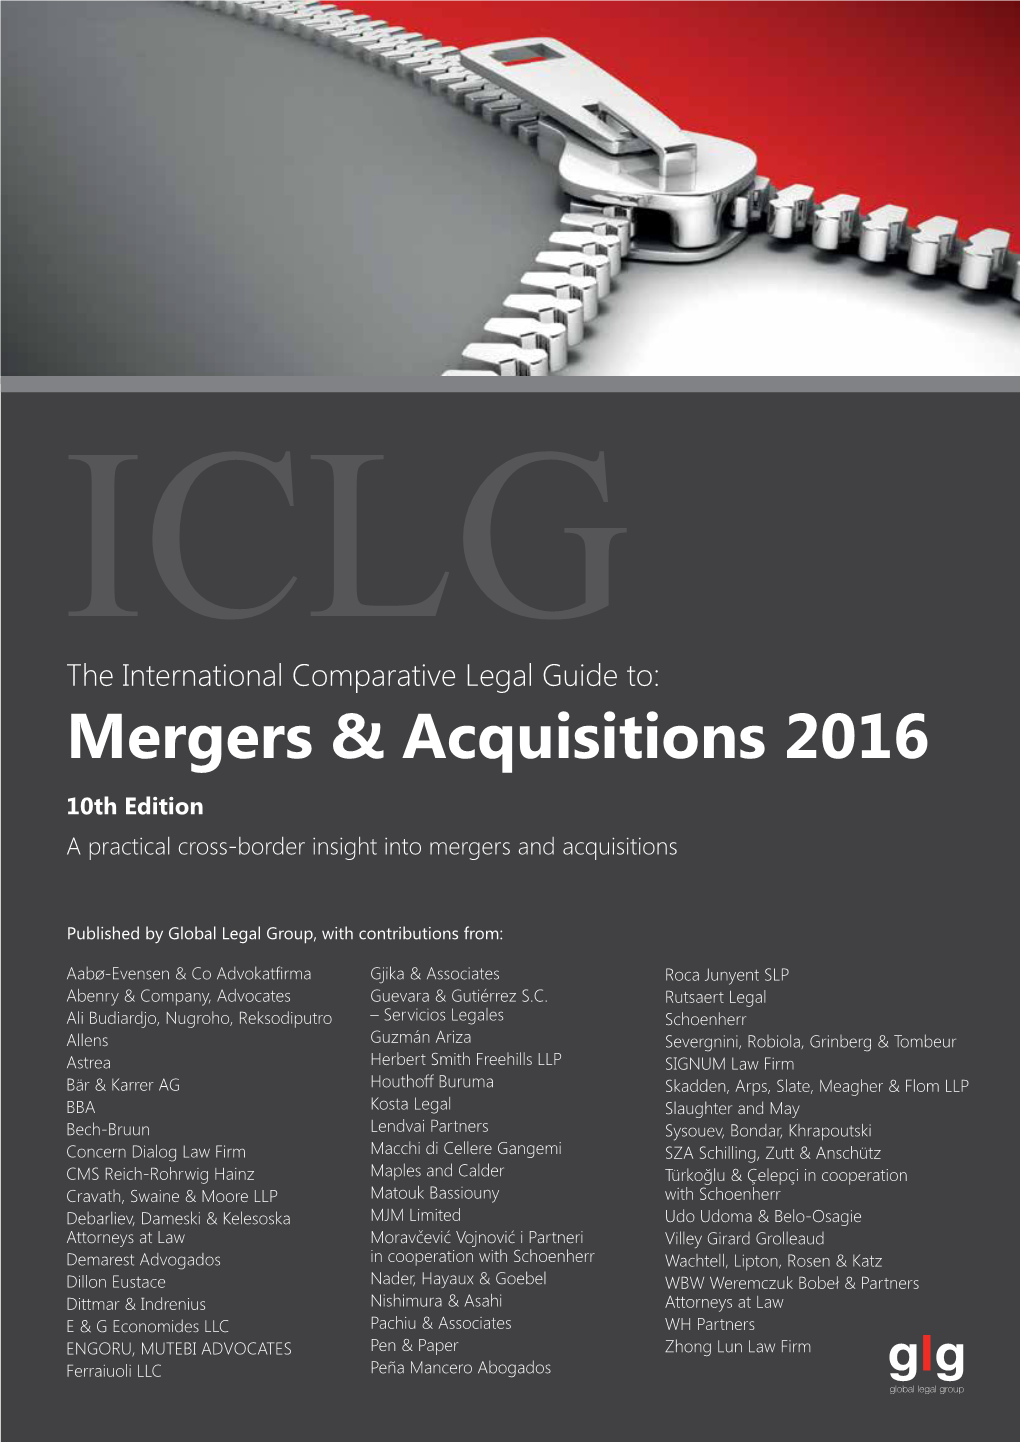 Mergers & Acquisitions 2016